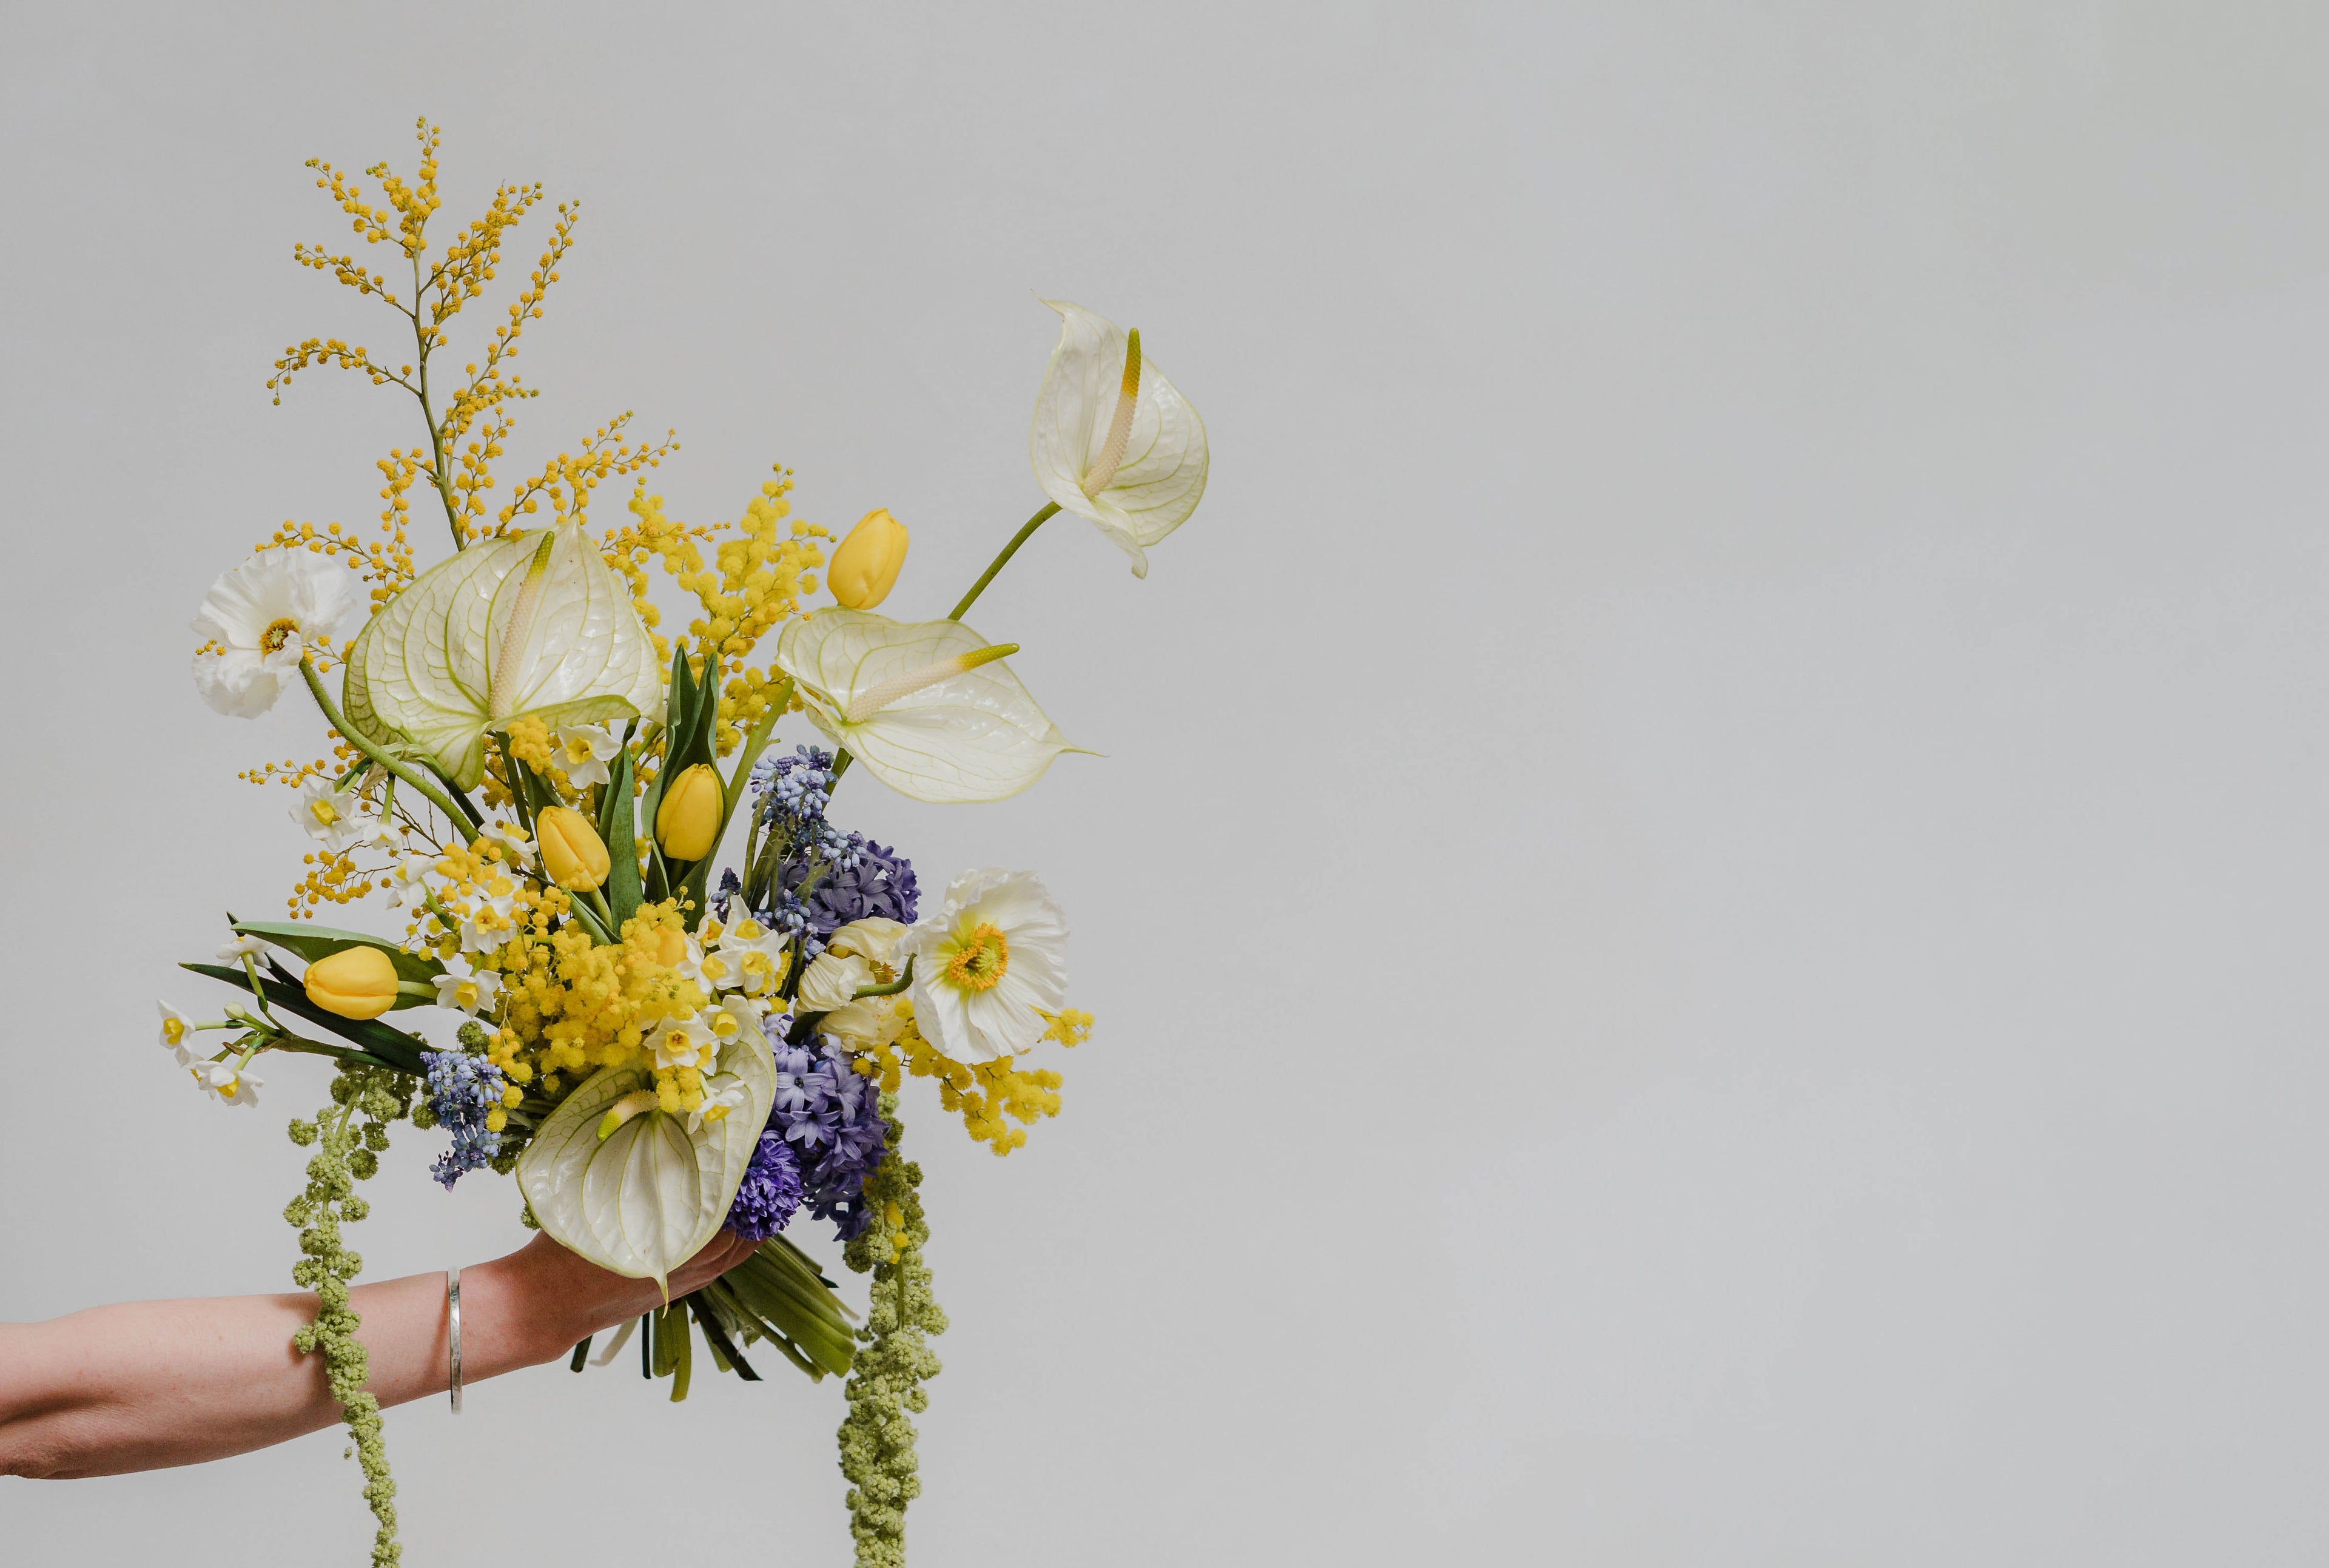 A true celebration of spring in vibrant yellow, ochre and Delph blue using French seasonal mimosa with scented spring bulb flowers and architectural terms offset the delicate petals of paper like papaver. A beautiful spring bouquet bursting with seasonal favourites and sweet scented spring blooms.